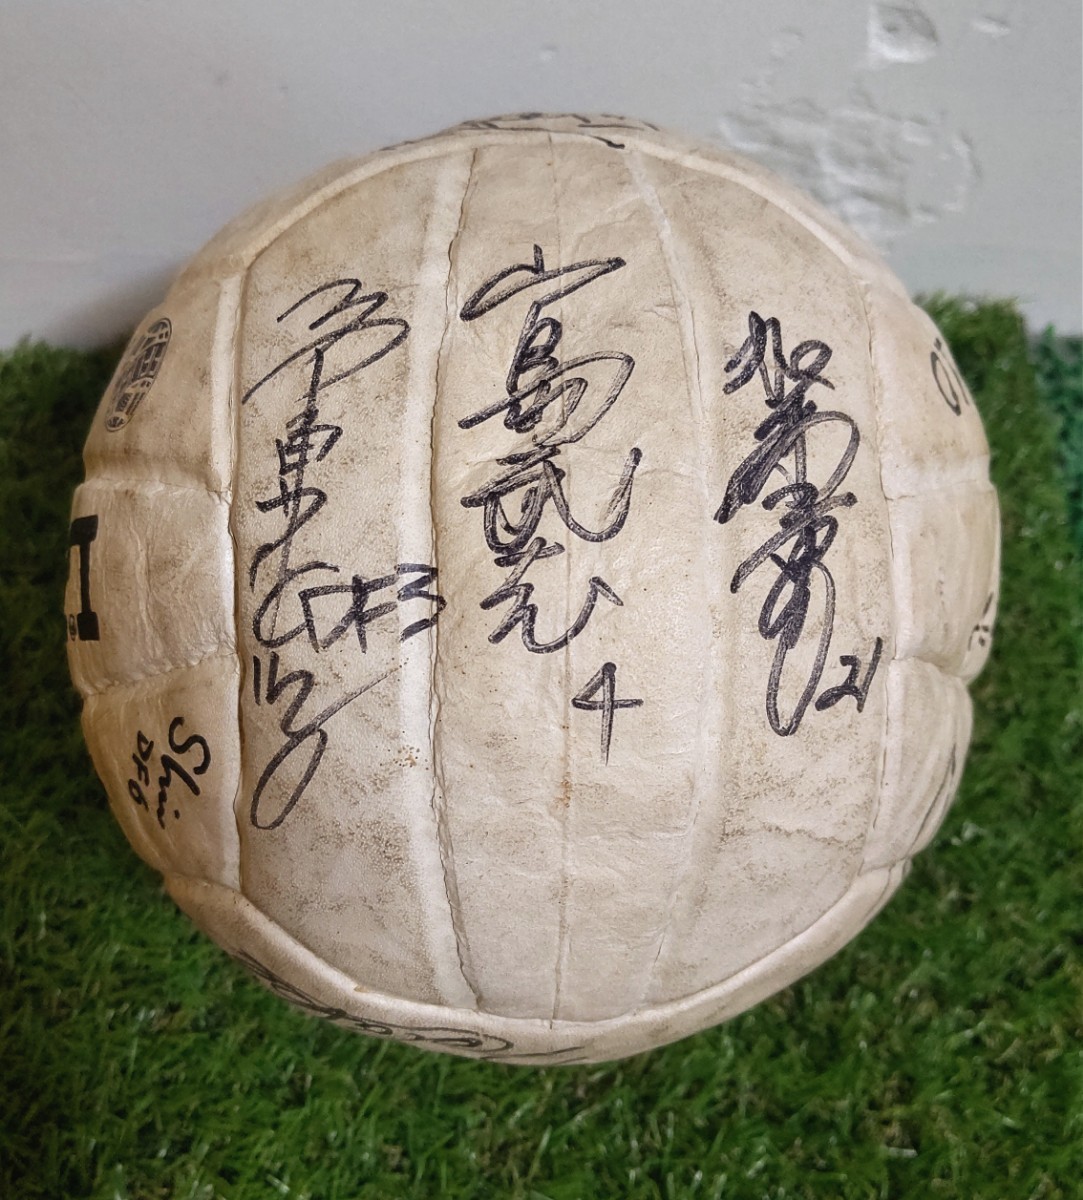 1990 period Tokyo gas FC(FC Tokyo ) with autograph ball 